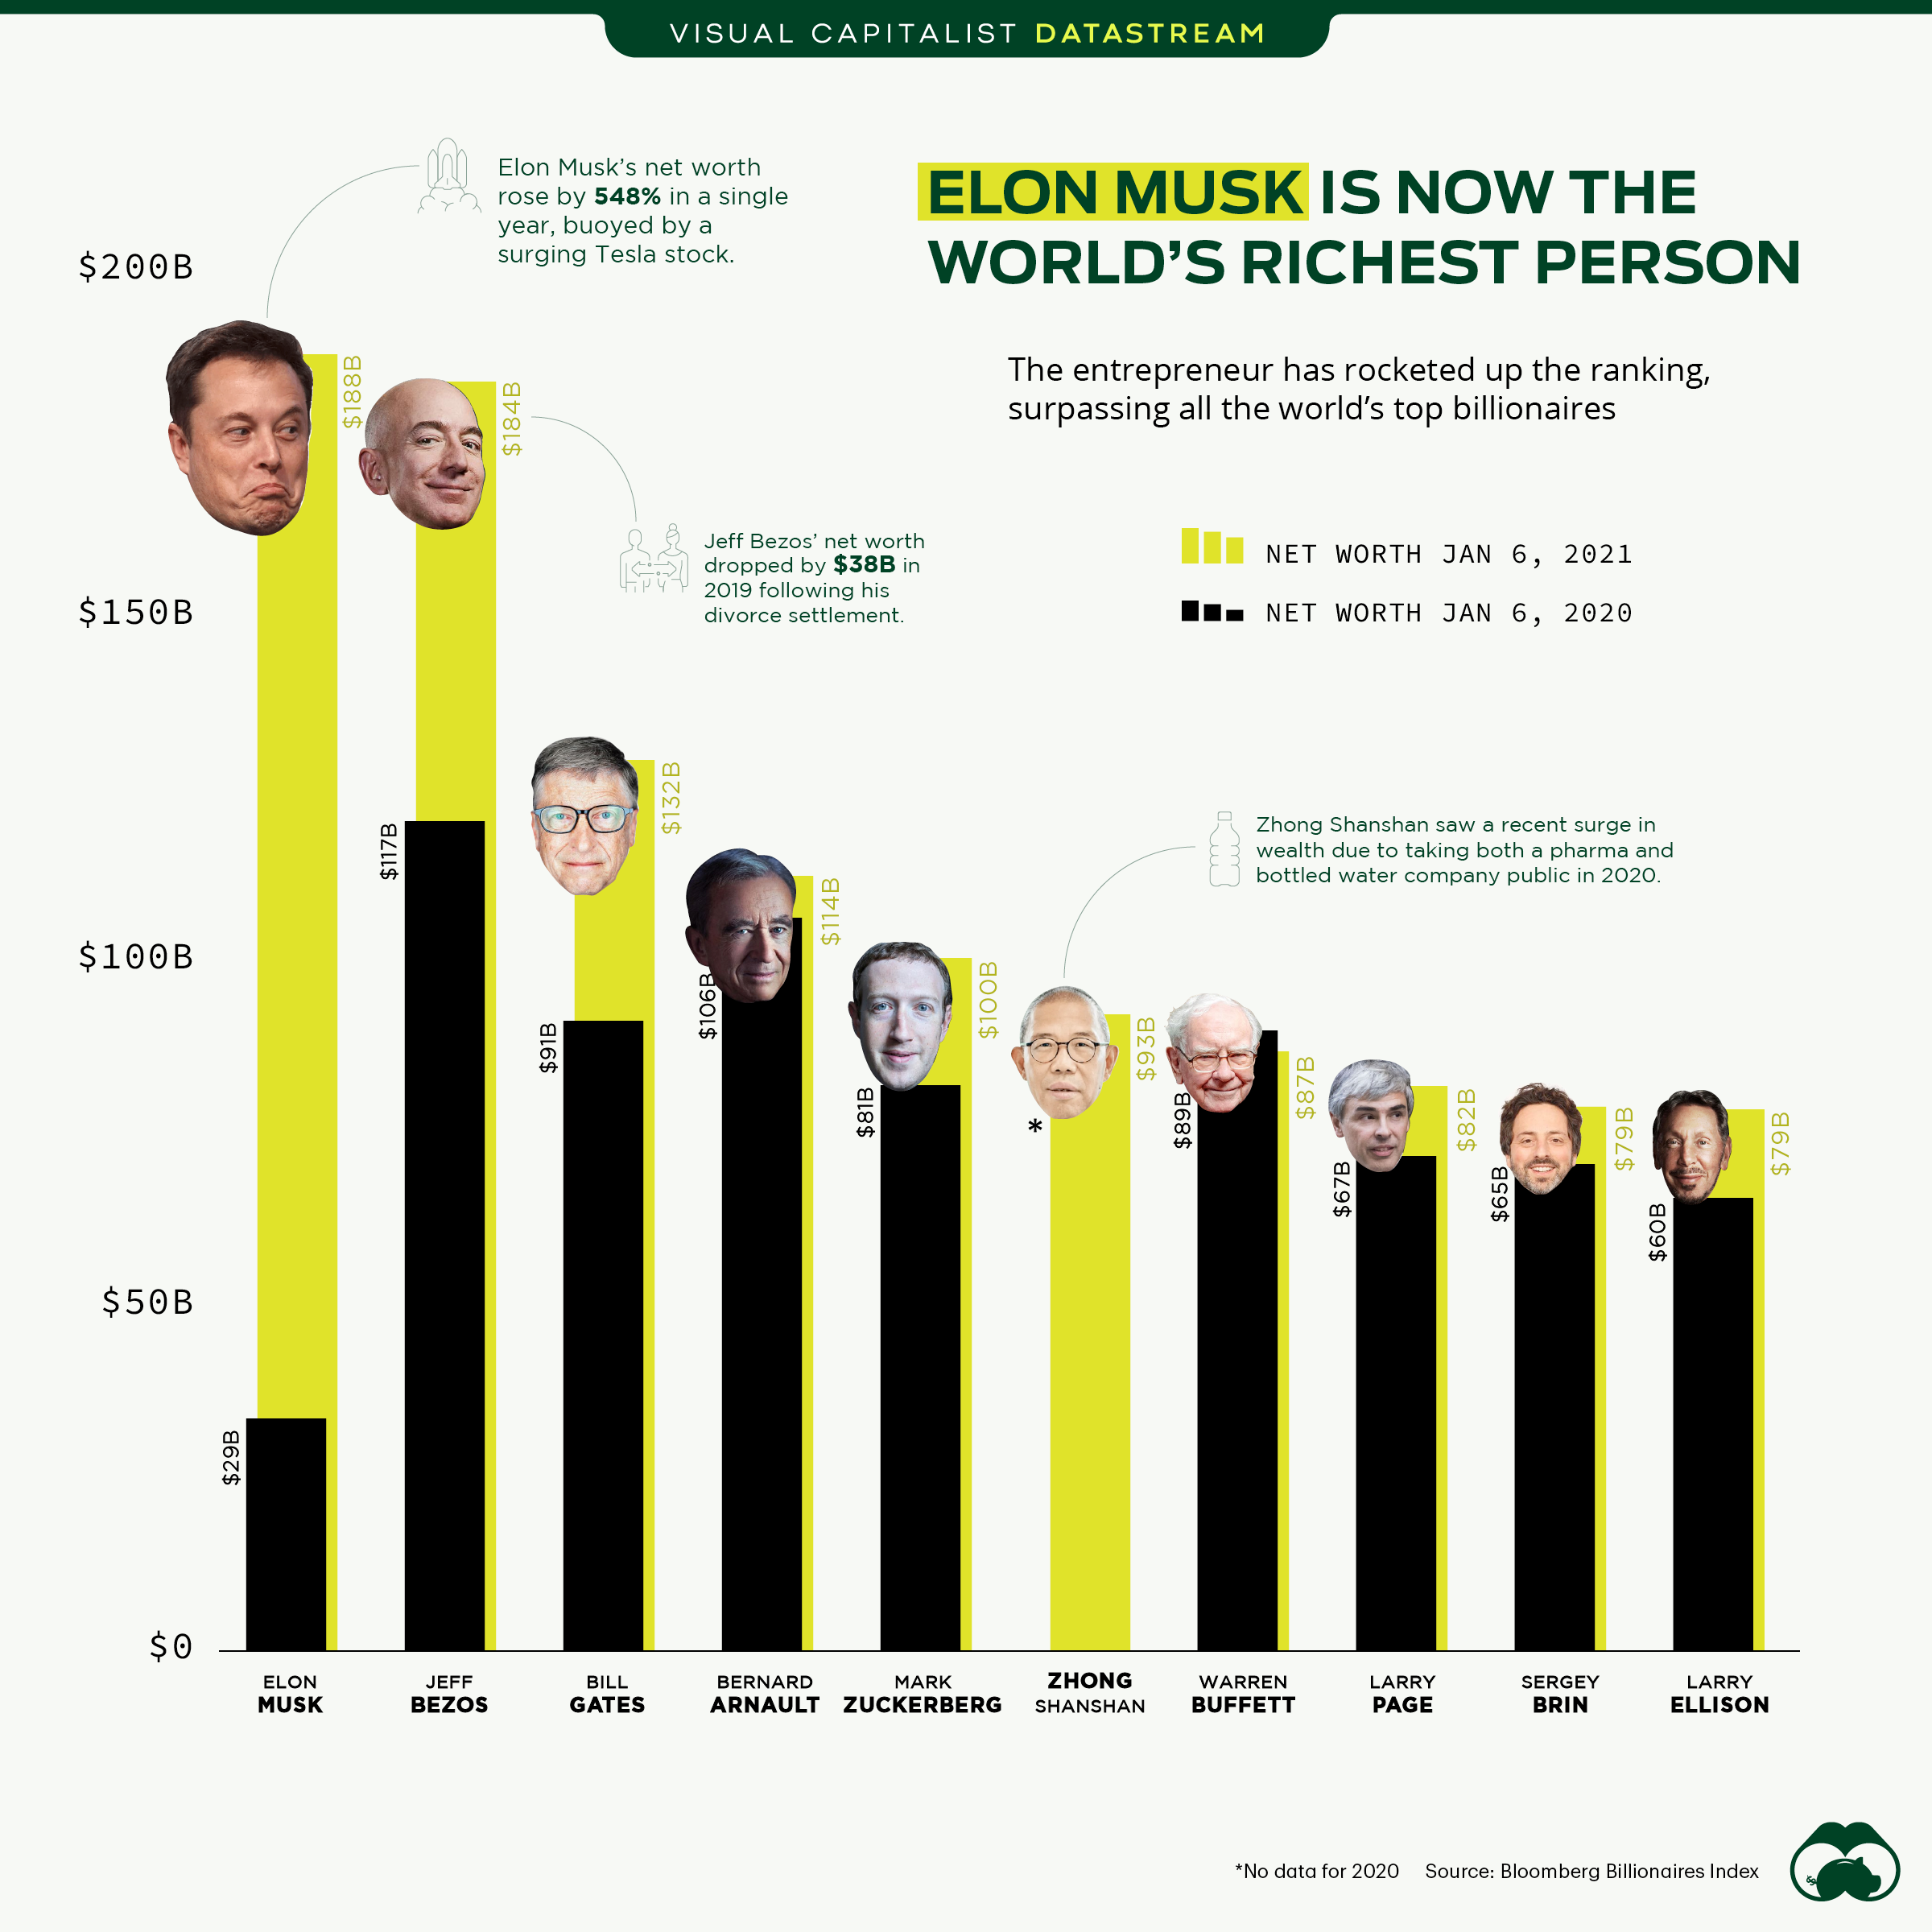 The World's Richest Man: A Look At The Elite's Wealthiest Individual